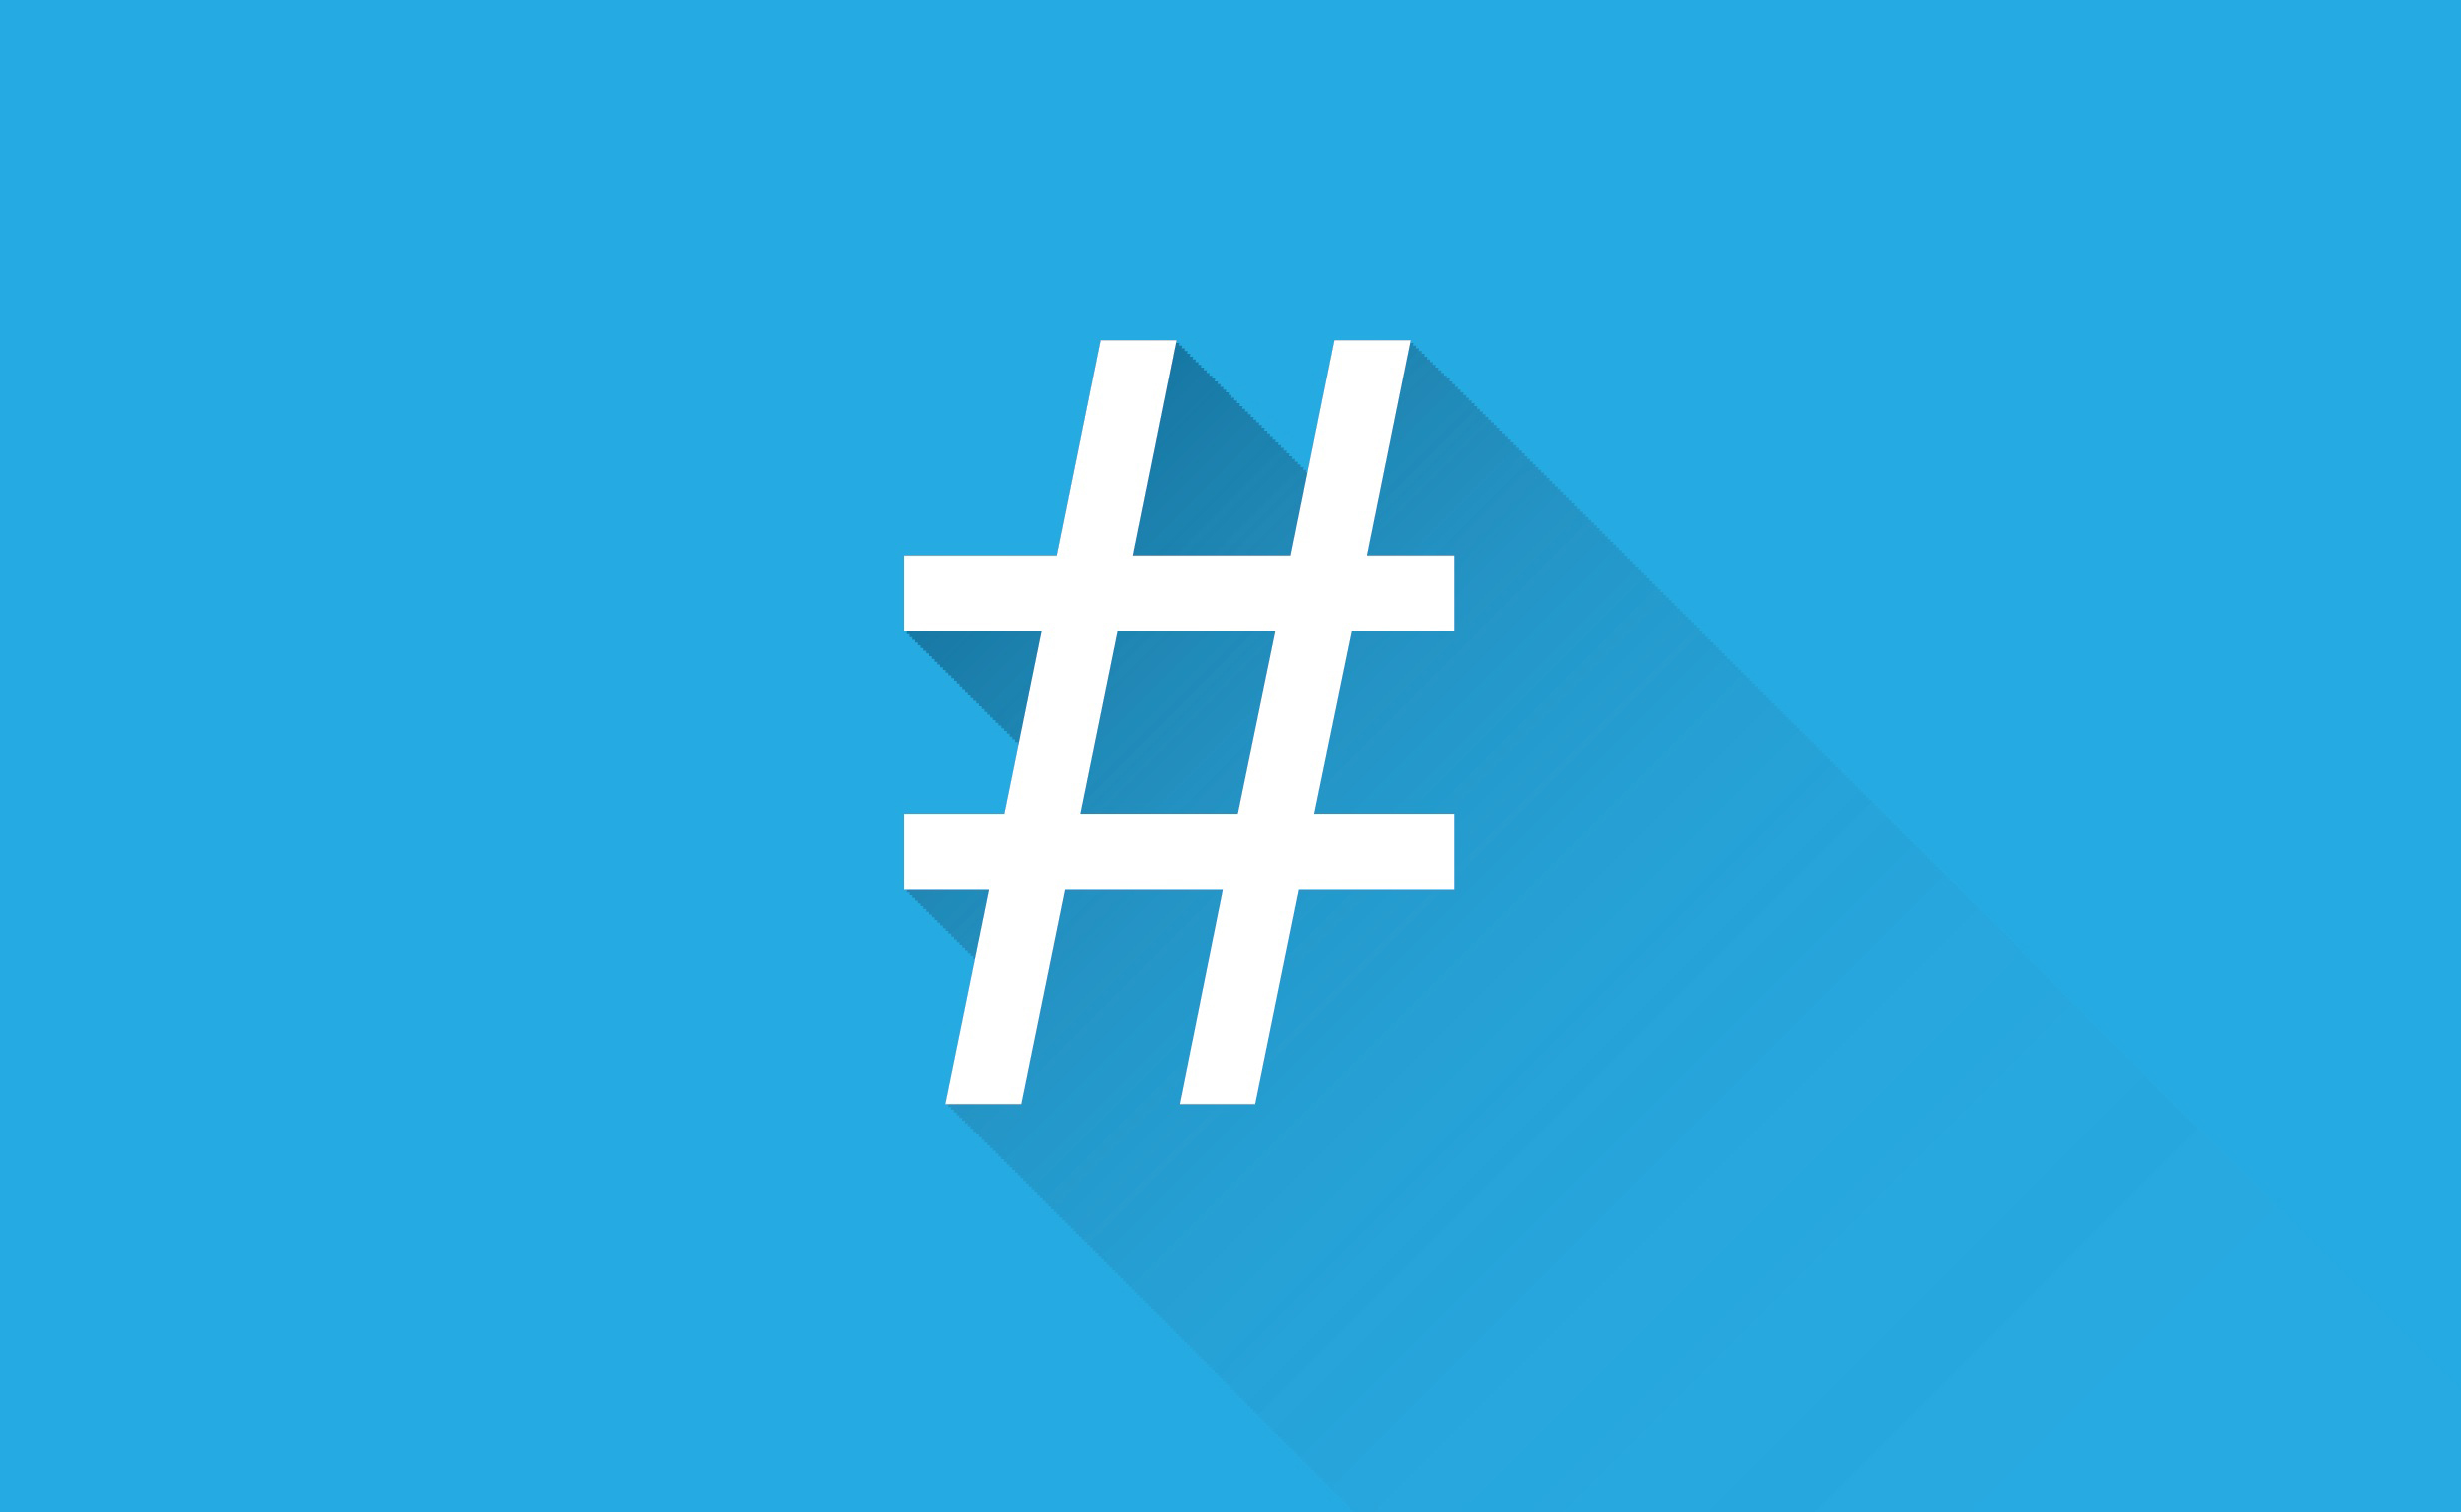 A white hashtag graphic against a bright blue background